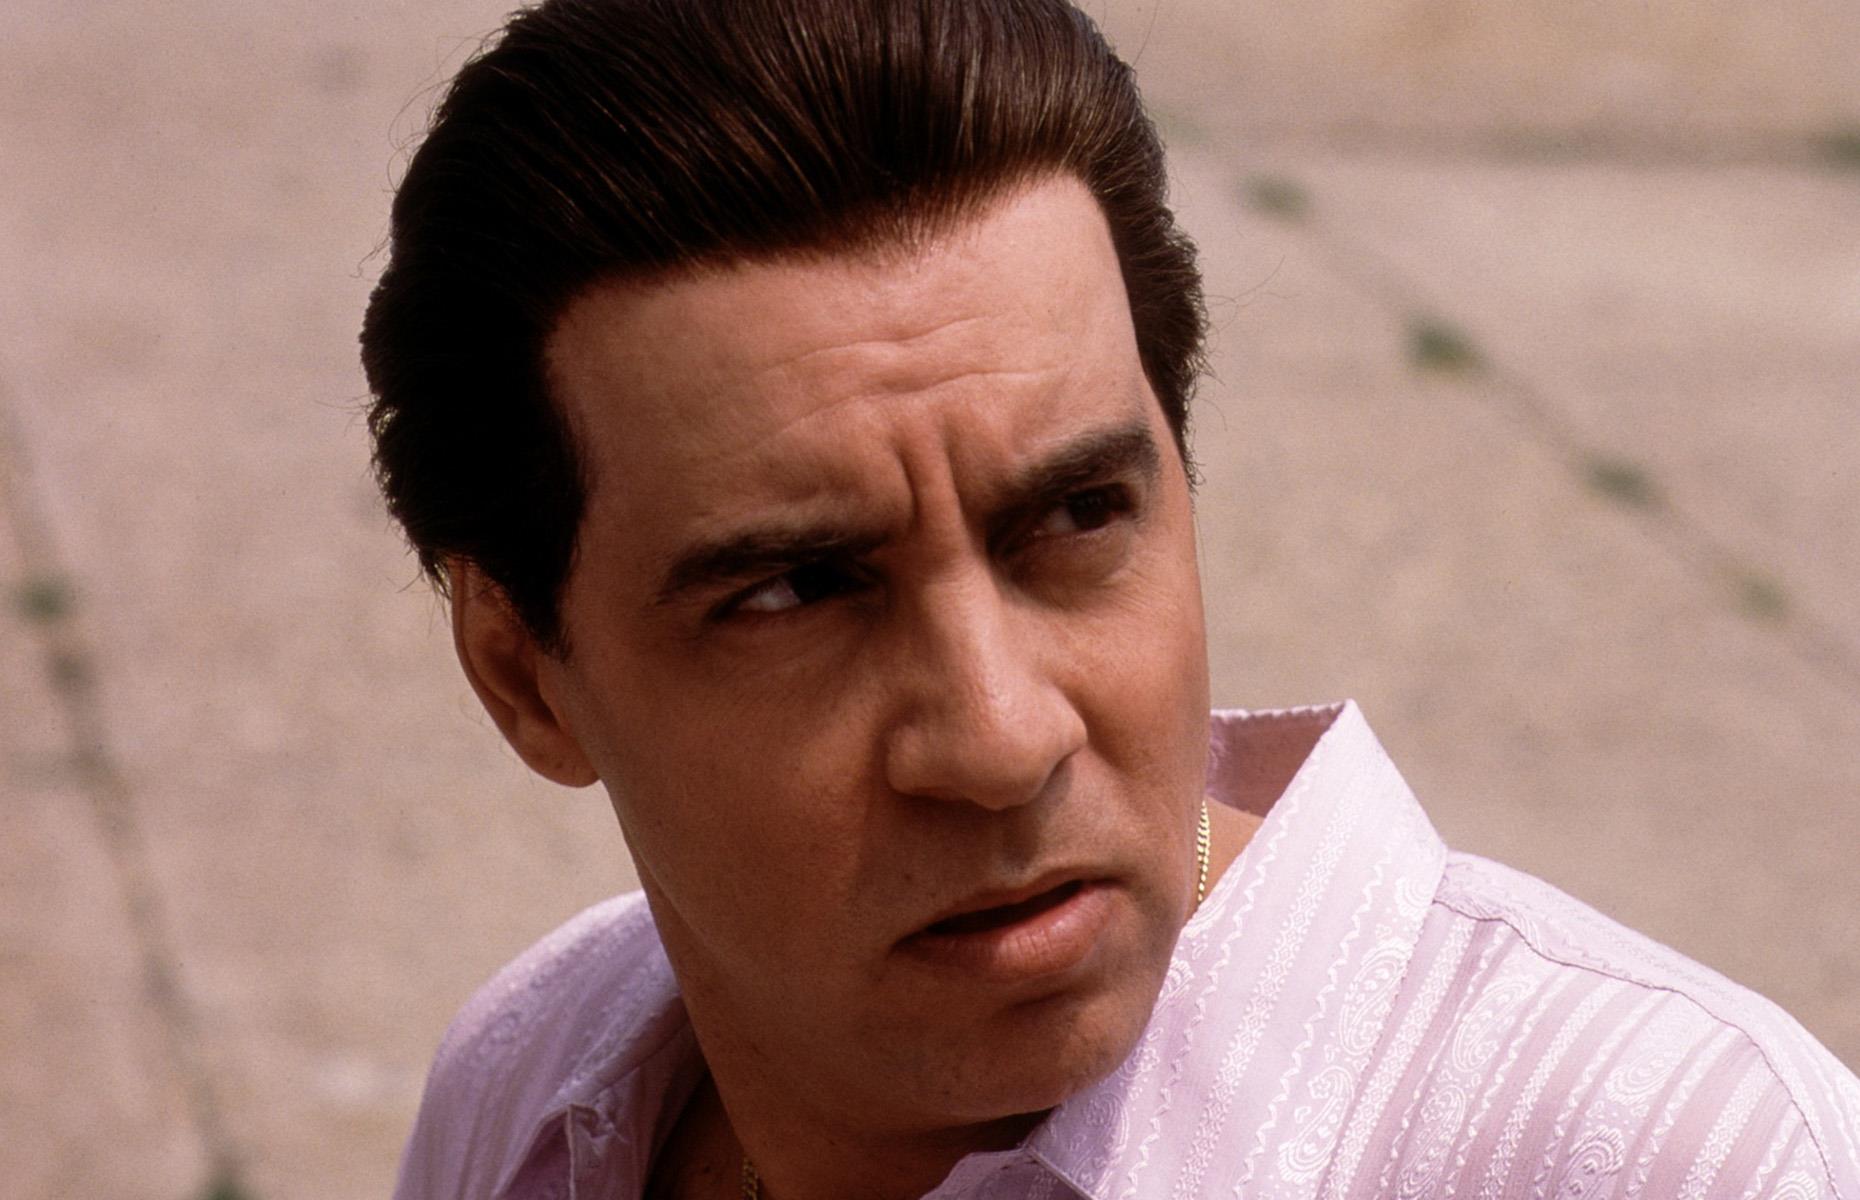 <p>'Little' Steven Van Zandt played mobster Silvio Dante, owner of the Bada Bing! club, which doubles as the headquarters for the DiMeo crime family.</p>  <p>Van Zandt rose to fame as a member of Bruce Springsteen's E Street Band, in which he plays guitar and mandolin. He also launched a solo music project, Little Steven and the Disciples of Soul, in the 1980s.</p>  <p>Aside from a non-speaking background part in the 1985 sports movie<em> American Flyers</em>, the musician had no acting experience when he landed his breakout gig on <em>The Sopranos.</em></p>